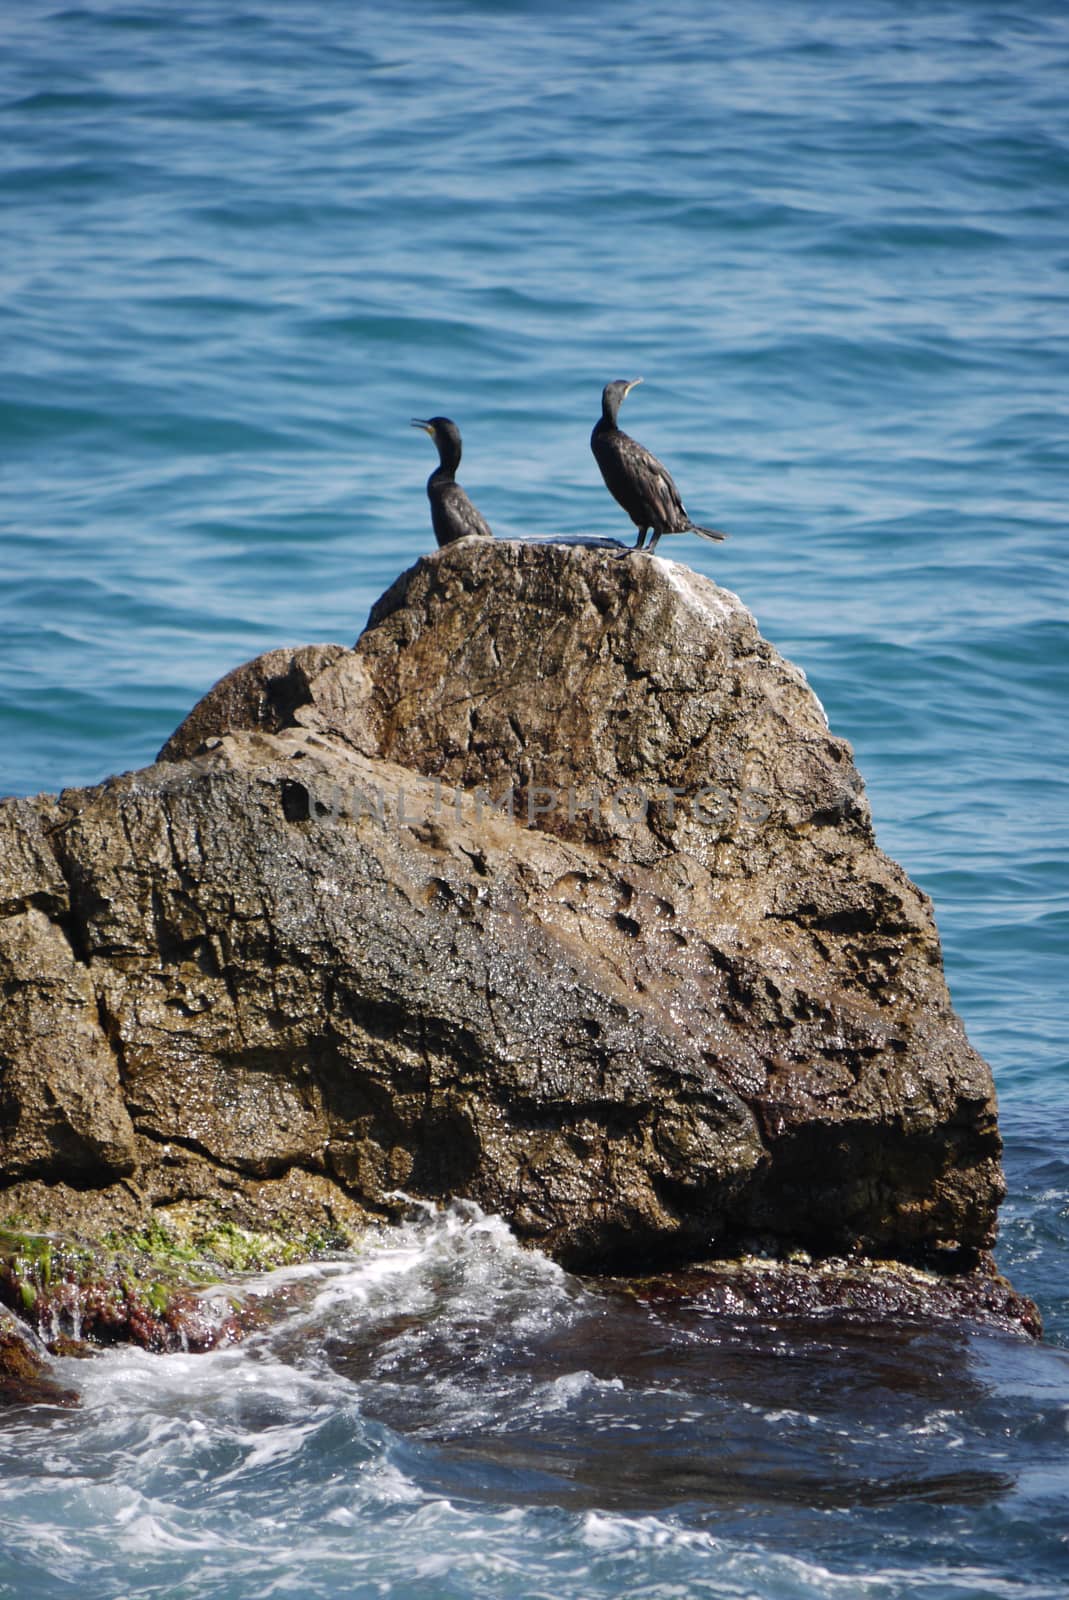 A pair of black sea birds on a rock that is washed by sea waves